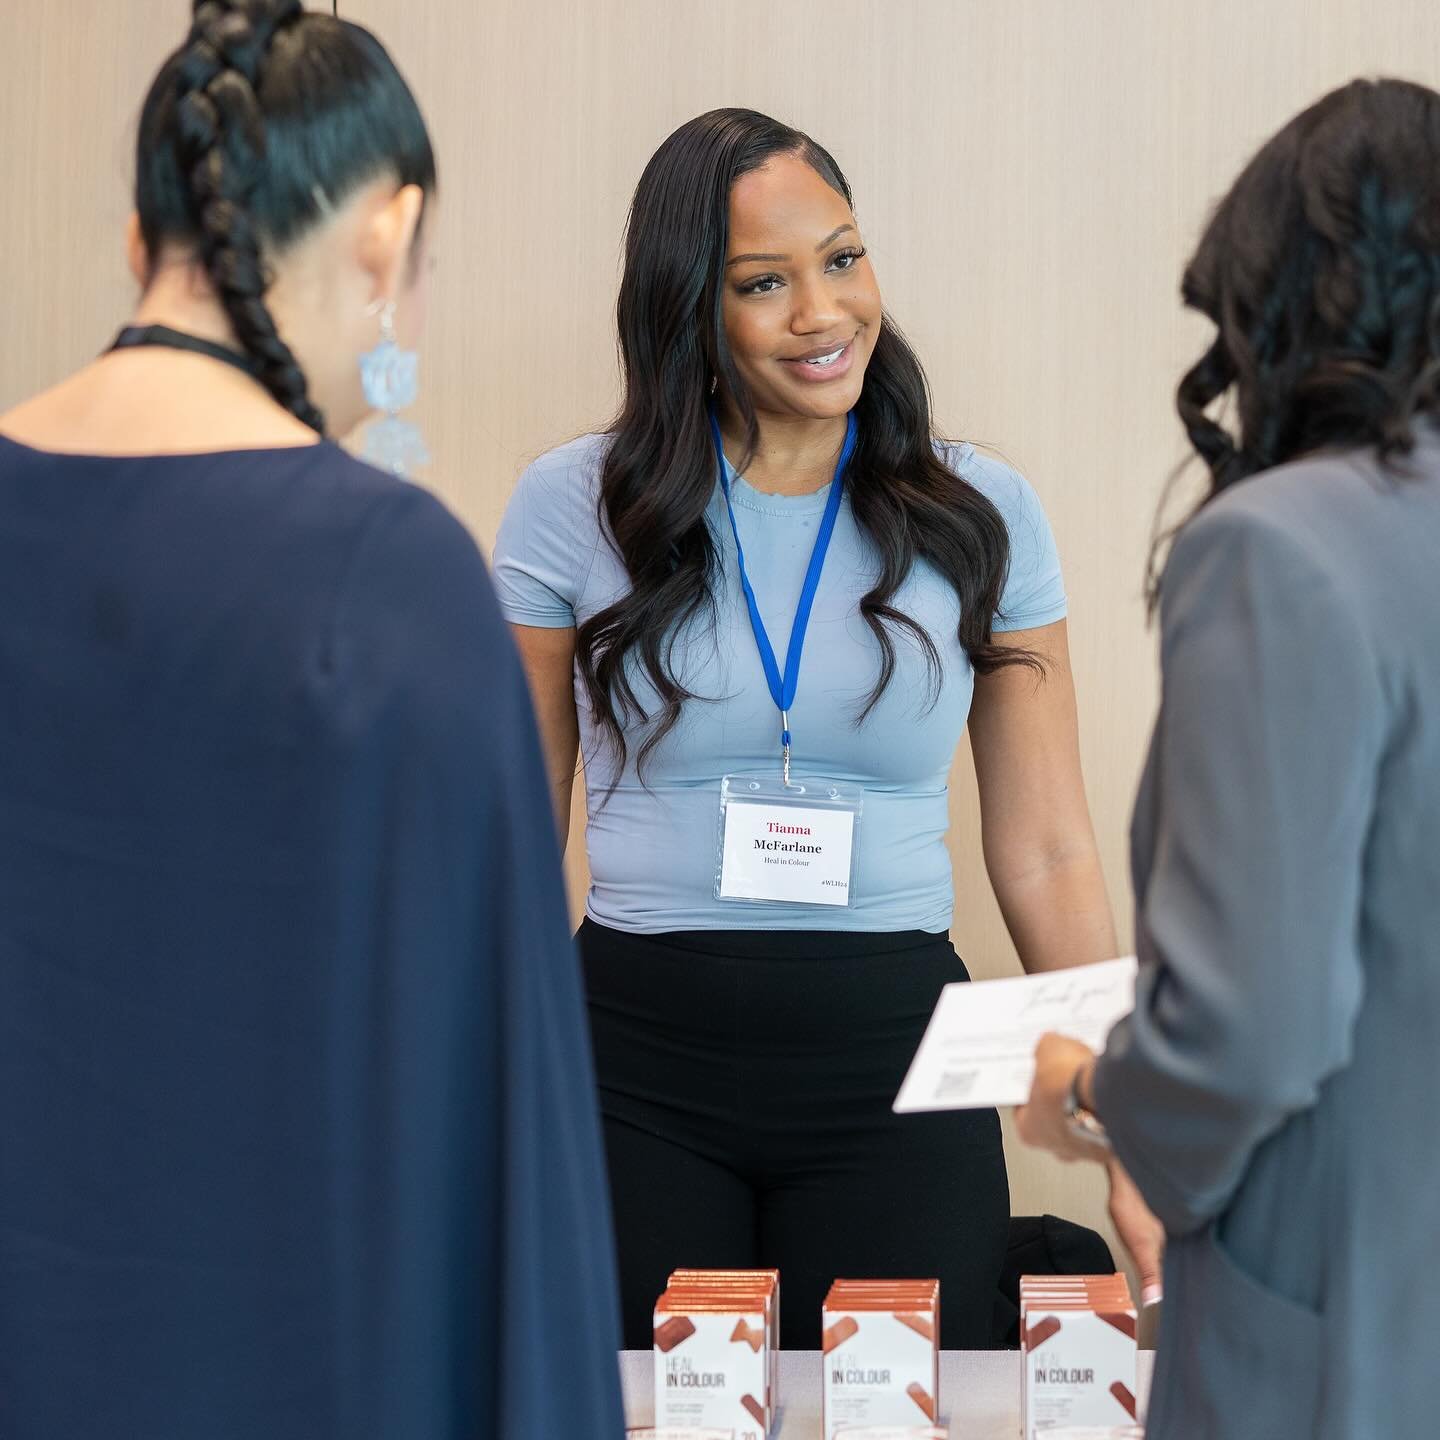 It&rsquo;s so beautiful to see women owned businesses flourishing 🌸💖🛍️ 

📸: @kapturedbykana for @theglobeevents Women Lead Here Summit x HER Market 

#womenowned #womensupportingwomen #womenempowerment #womeninbusiness #shopsmall #supportlocal #h